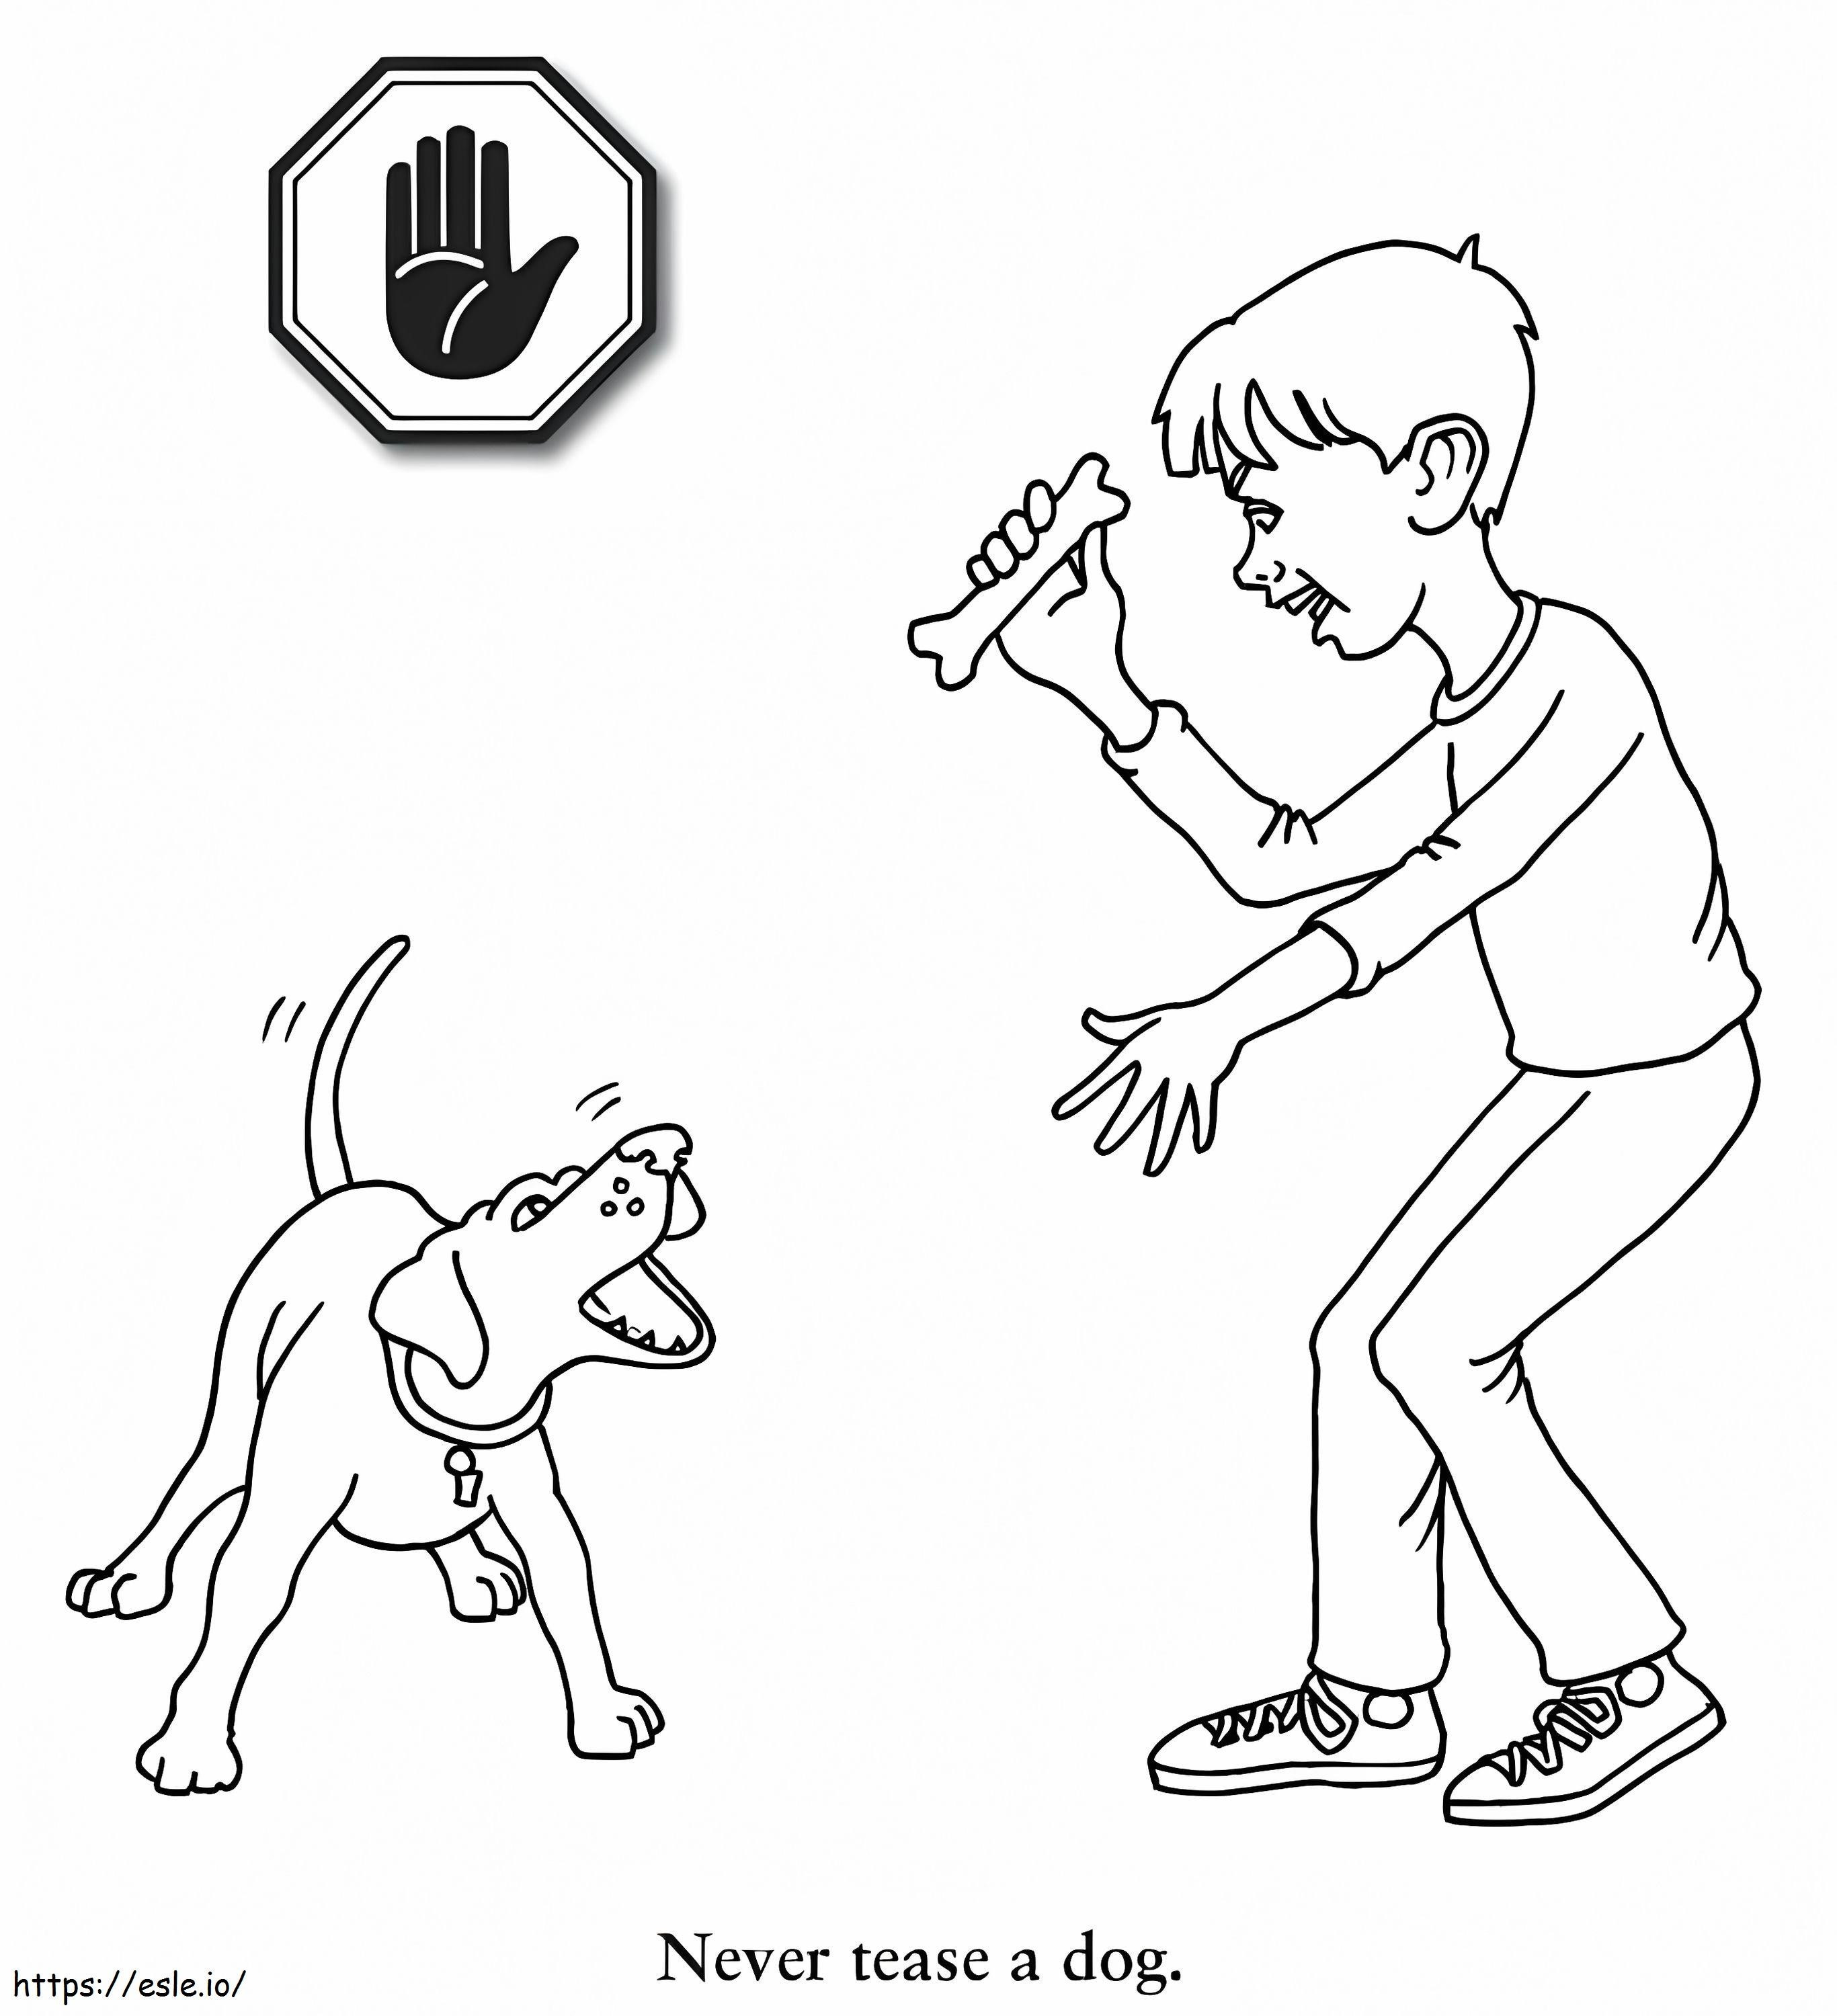 Never Tease A Dog coloring page